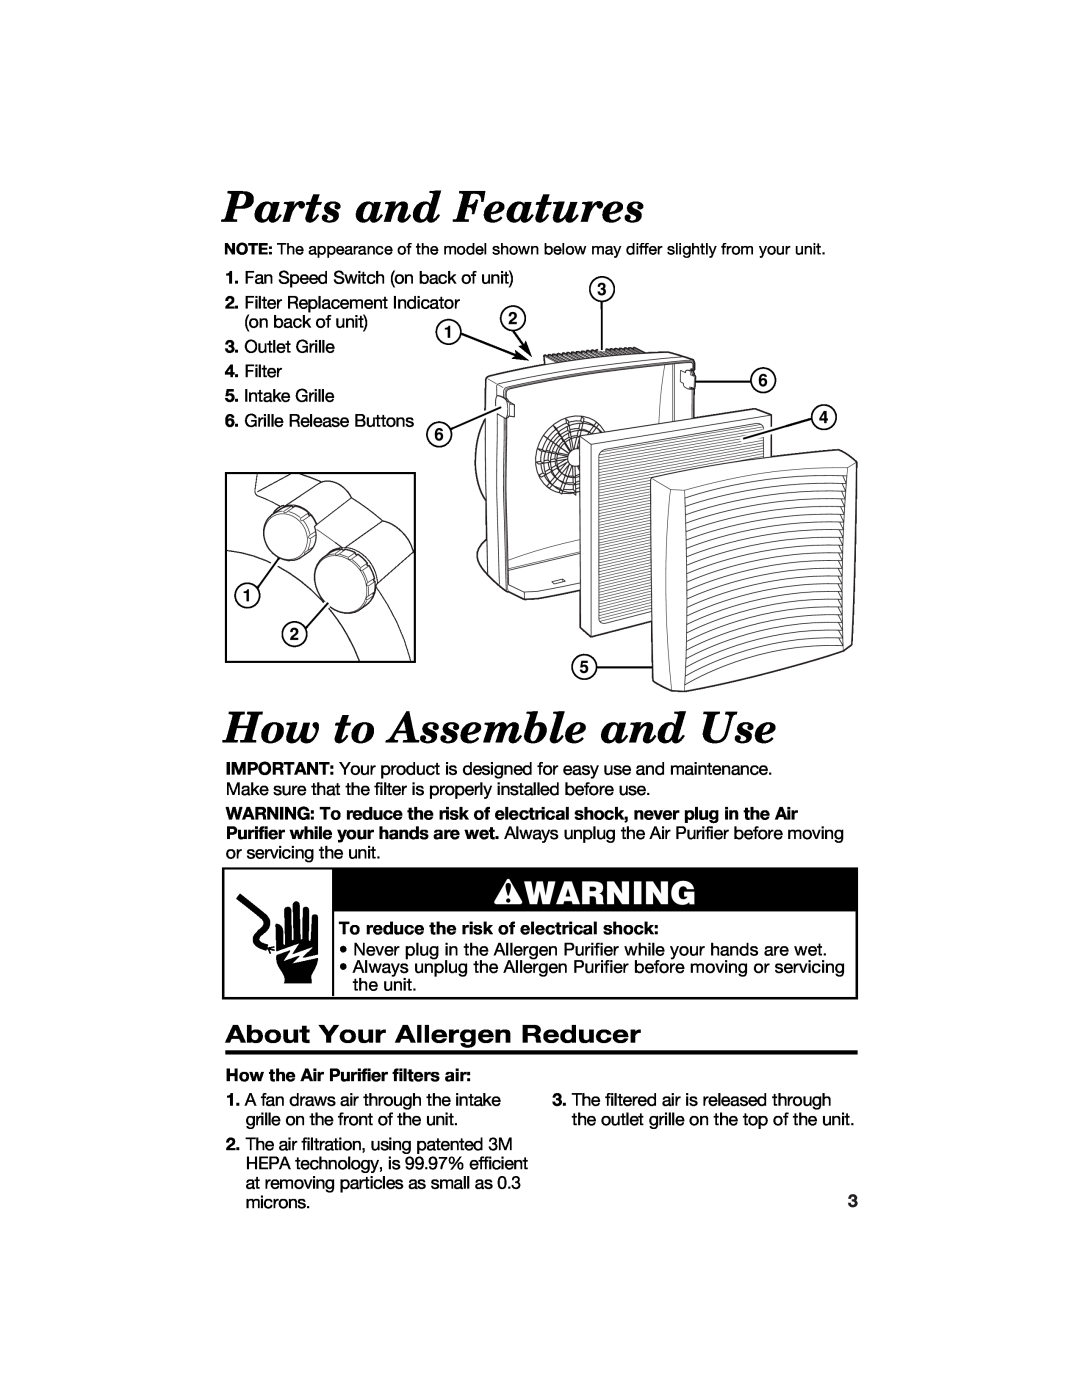 Hamilton Beach 840133100 manual Parts and Features, How to Assemble and Use, wWARNING, About Your Allergen Reducer 